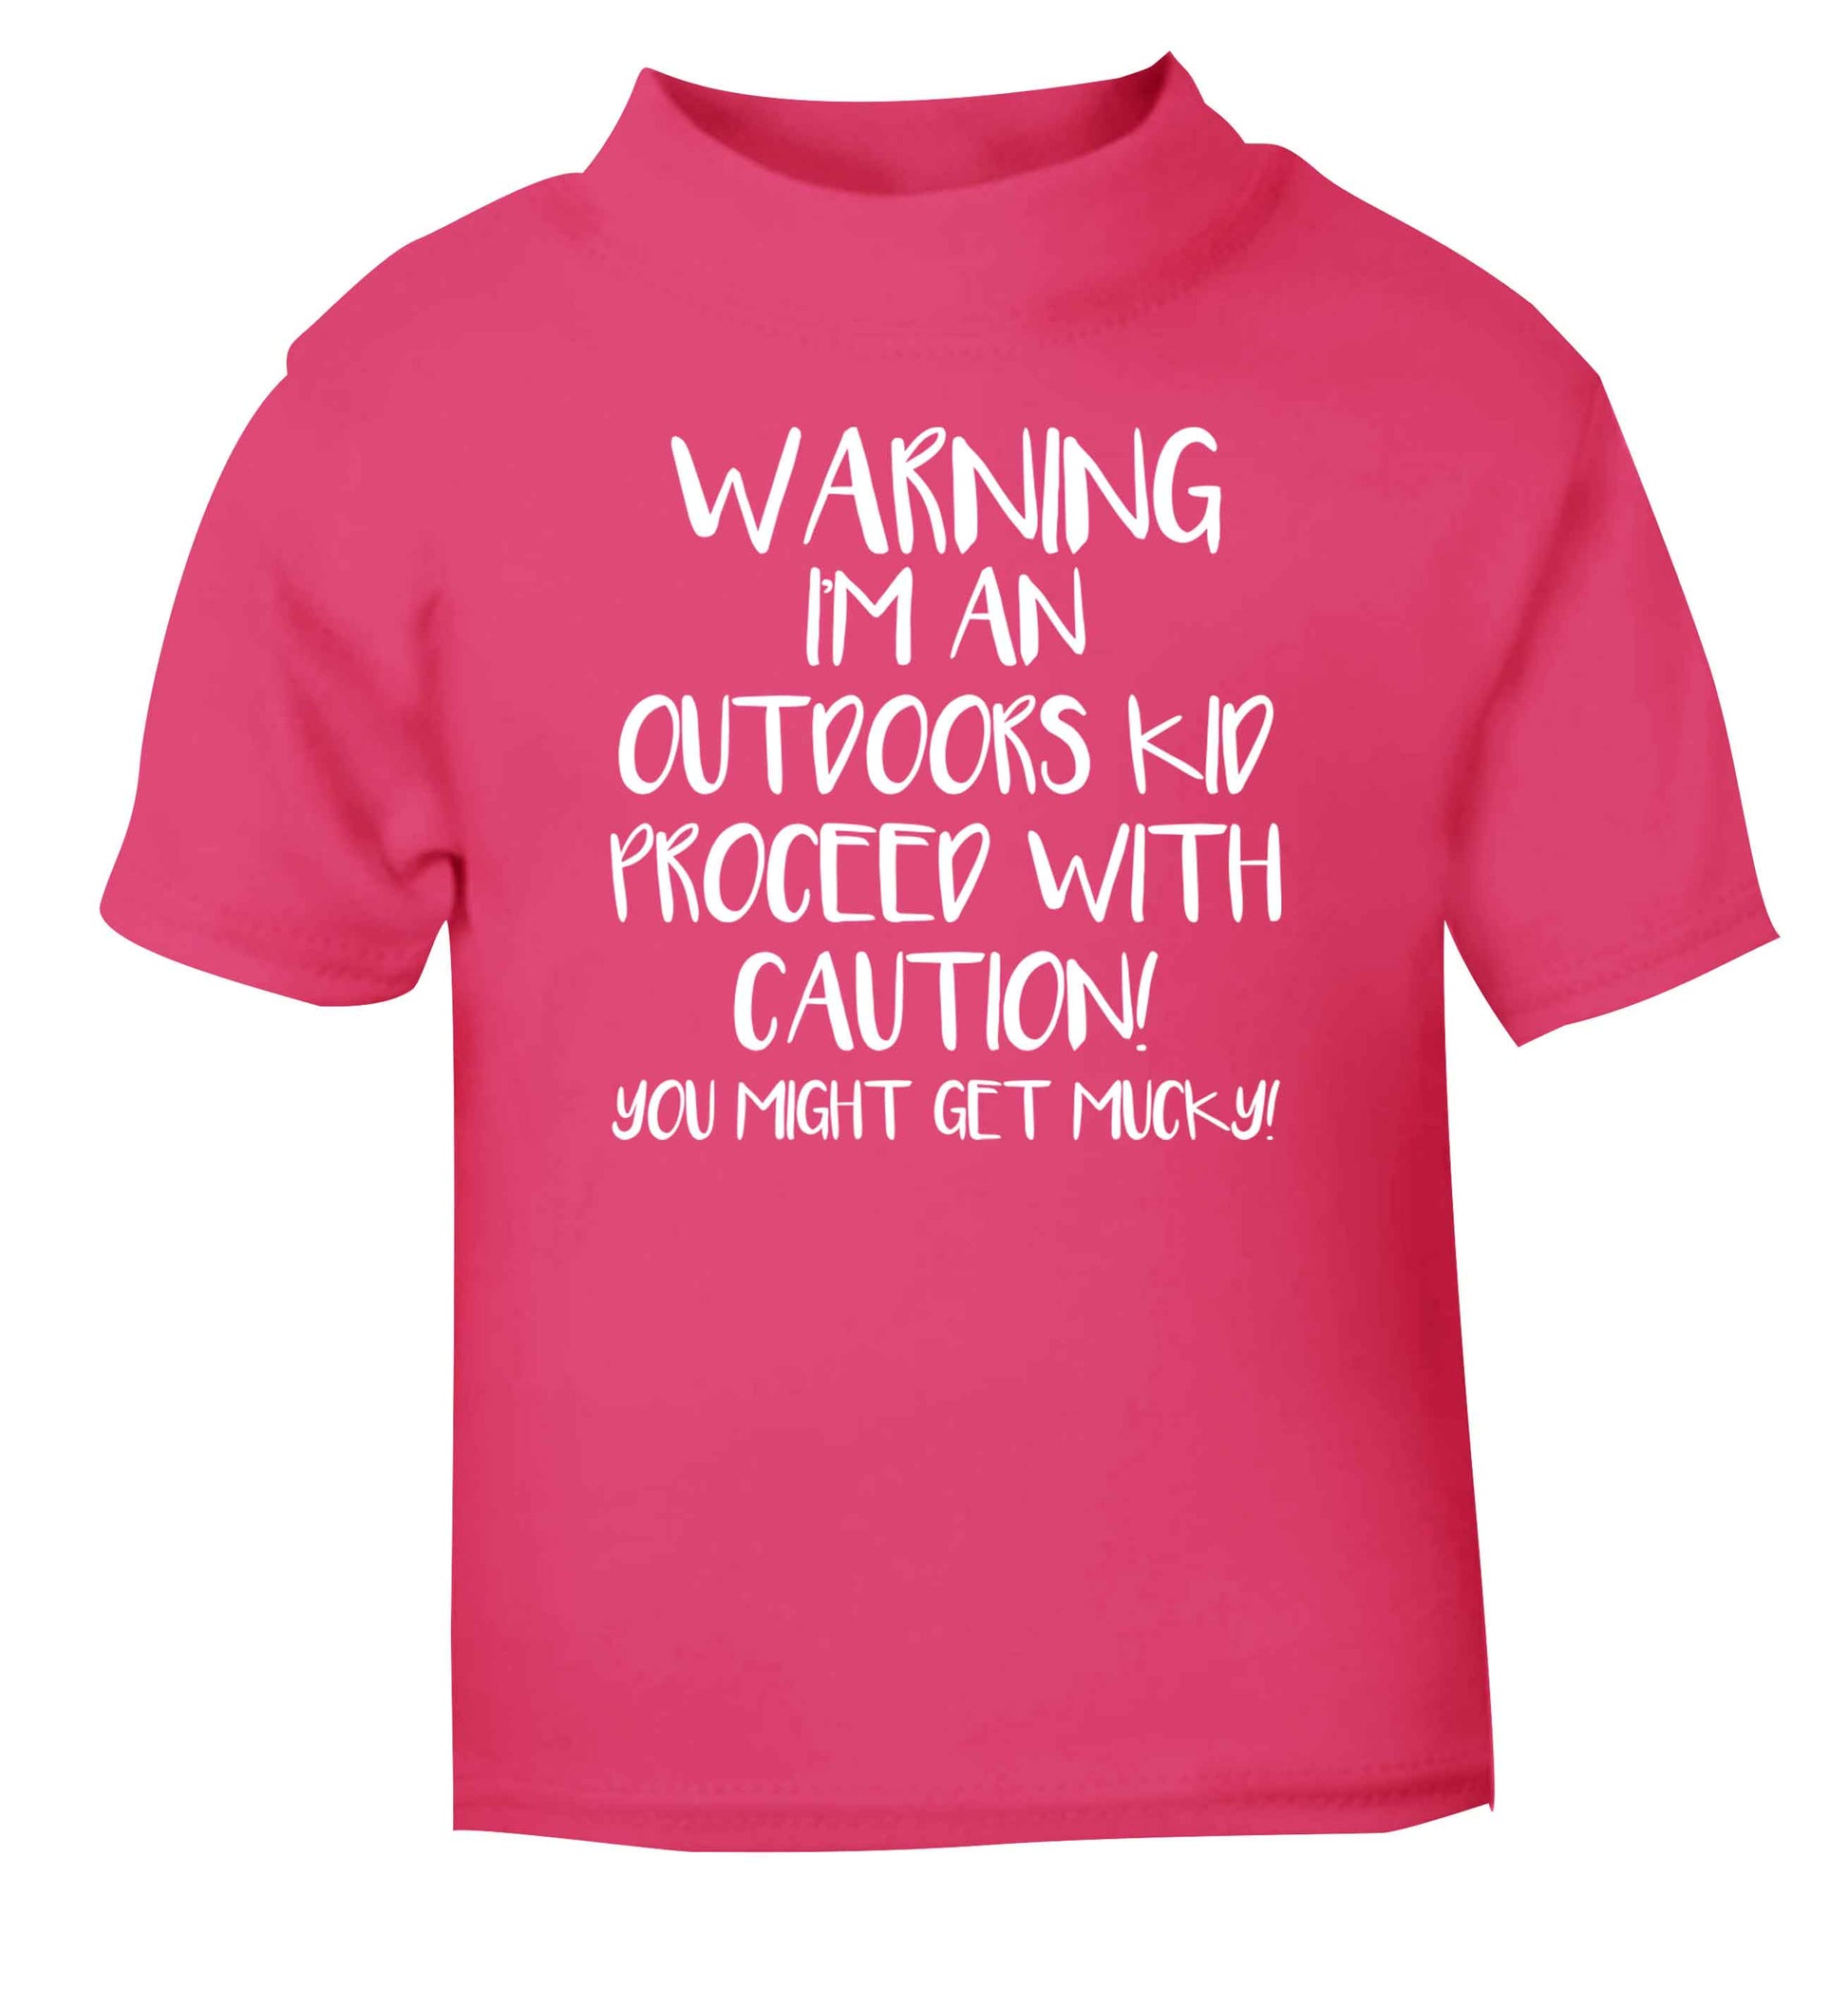 Warning I'm an outdoors kid! Proceed with caution you might get mucky pink Baby Toddler Tshirt 2 Years